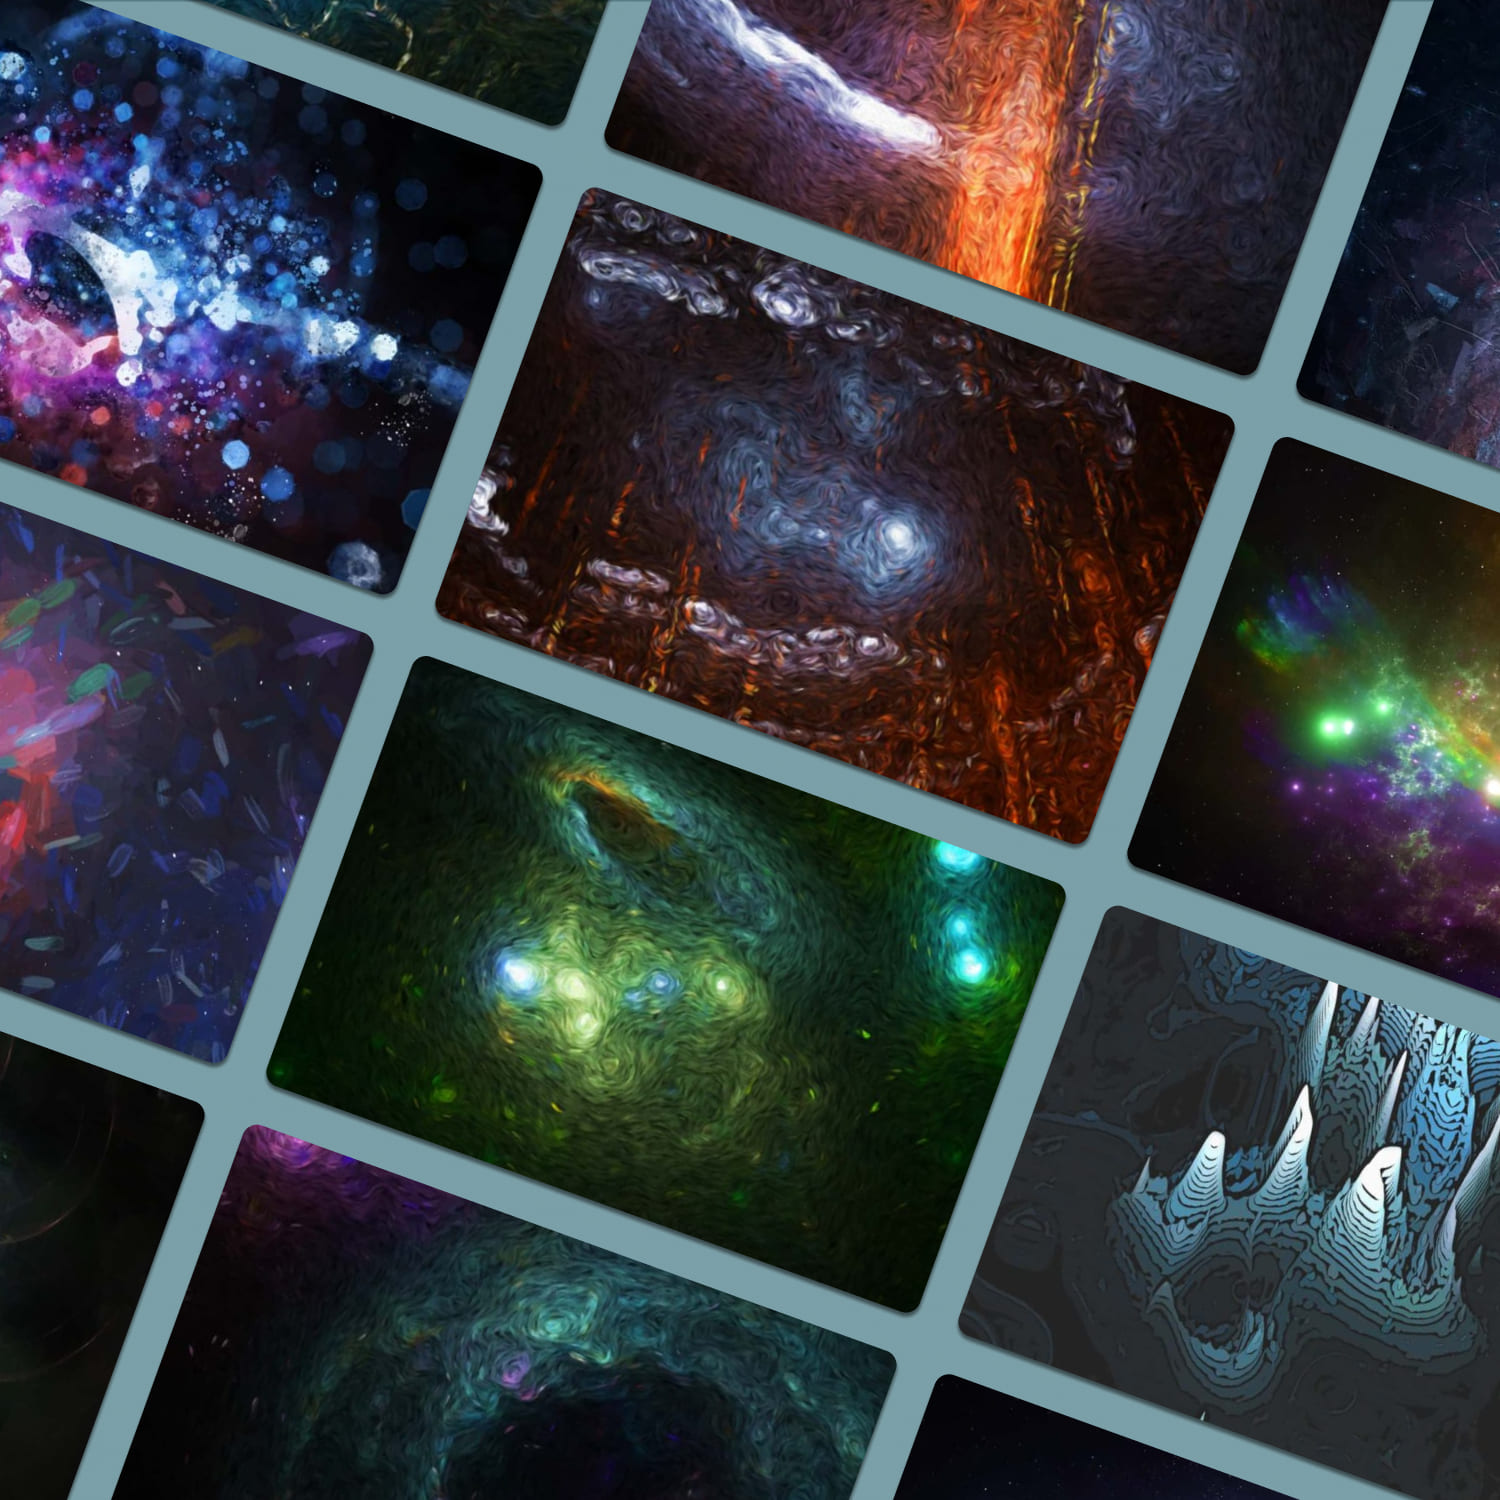 3000+ Space Backgrounds and Textures Collection – Vol.1 cover.